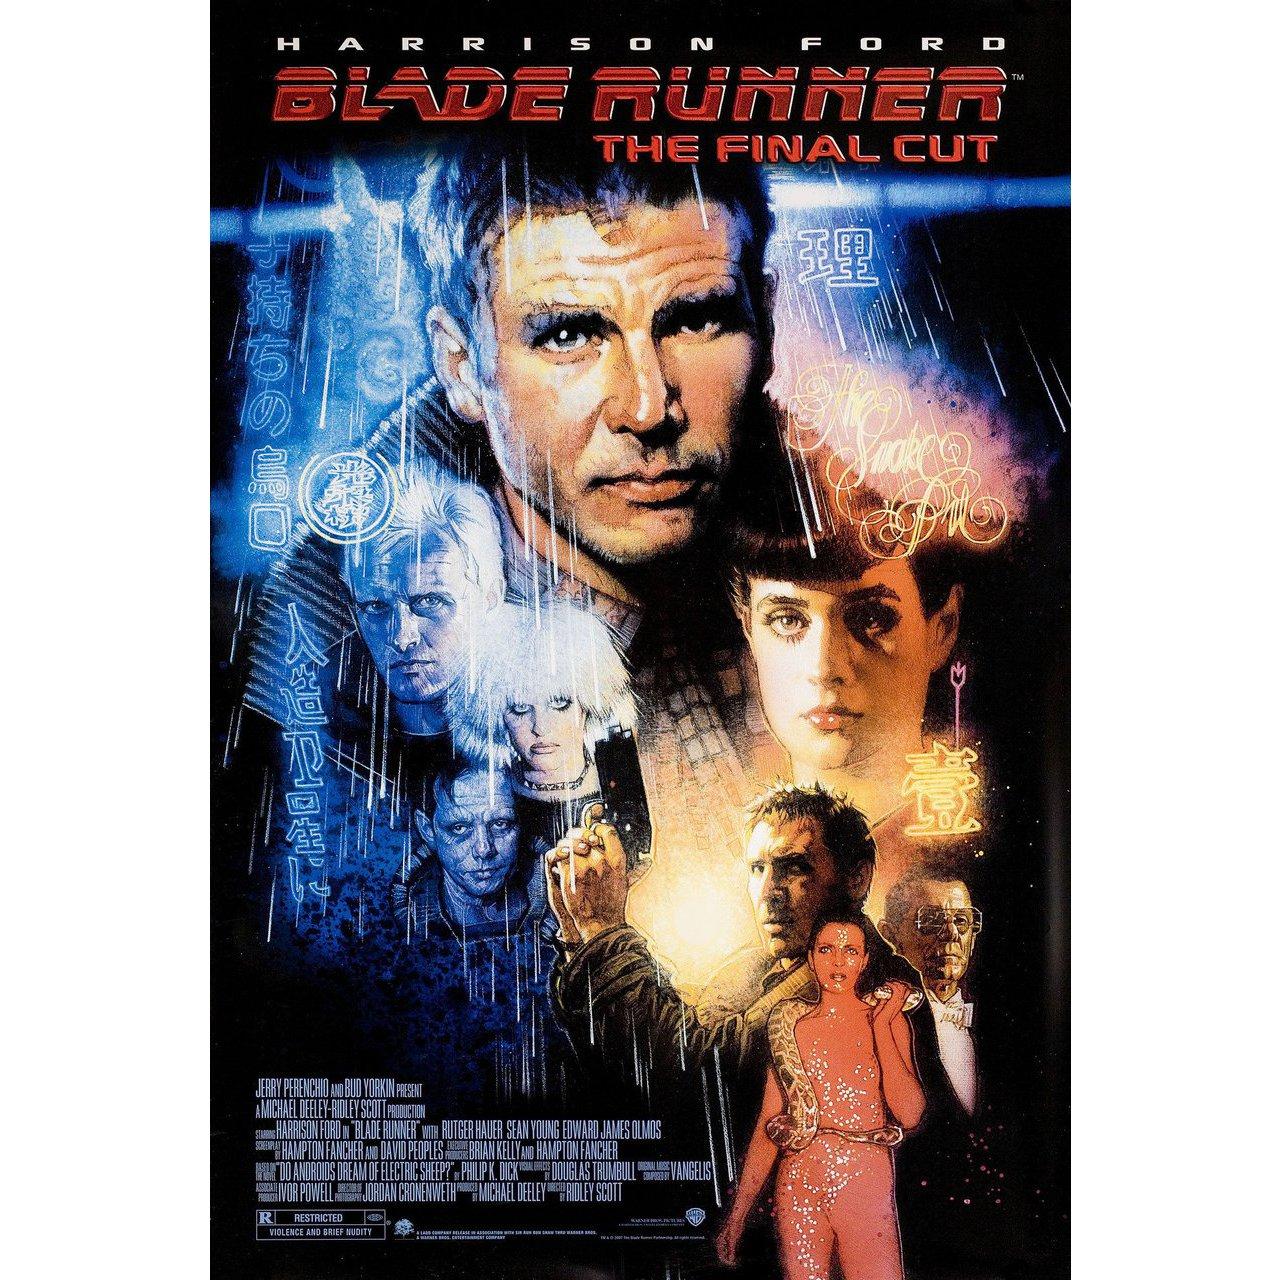 Original 2007 re-release U.S. one sheet poster by Drew Struzan for the 1982 film ‘Blade Runner’ directed by Ridley Scott with Harrison Ford / Rutger Hauer / Sean Young / Edward James Olmos. Very good-fine condition, rolled. Please note: the size is